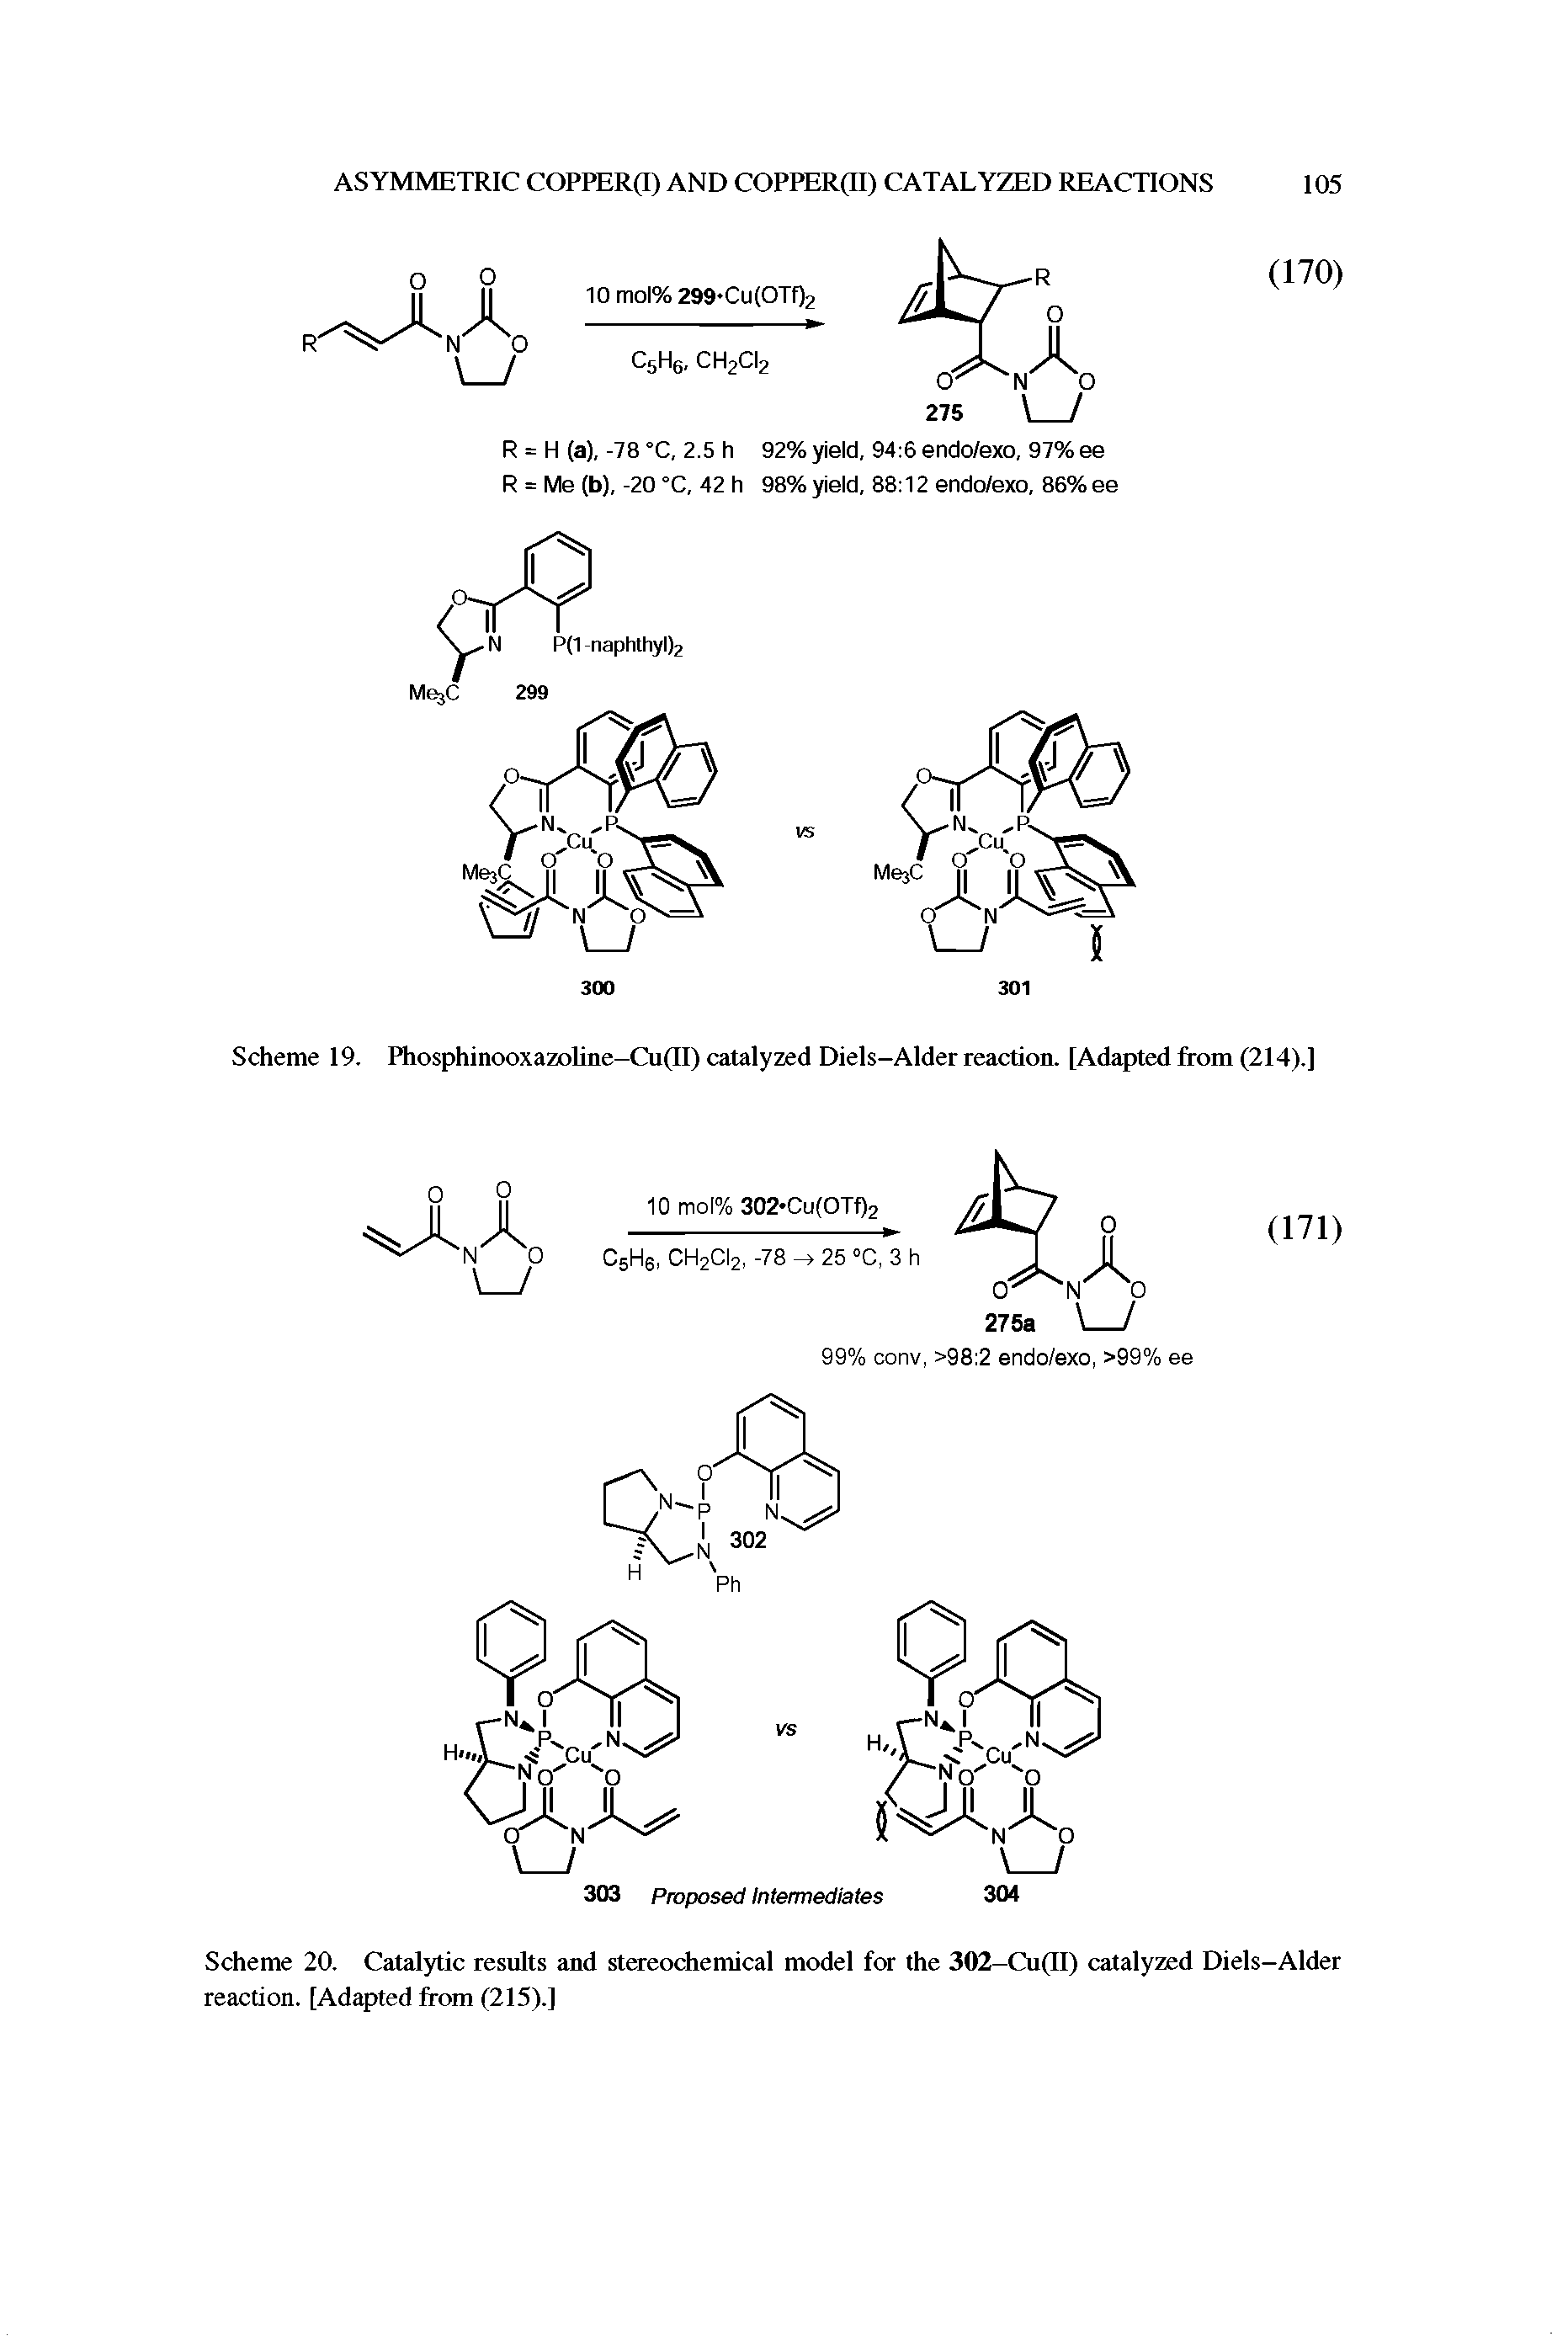 Scheme 20. Catalytic results and stereochemical model for the 302-Cu ) catalyzed Diels-Alder reaction. [Adapted from (215).]...